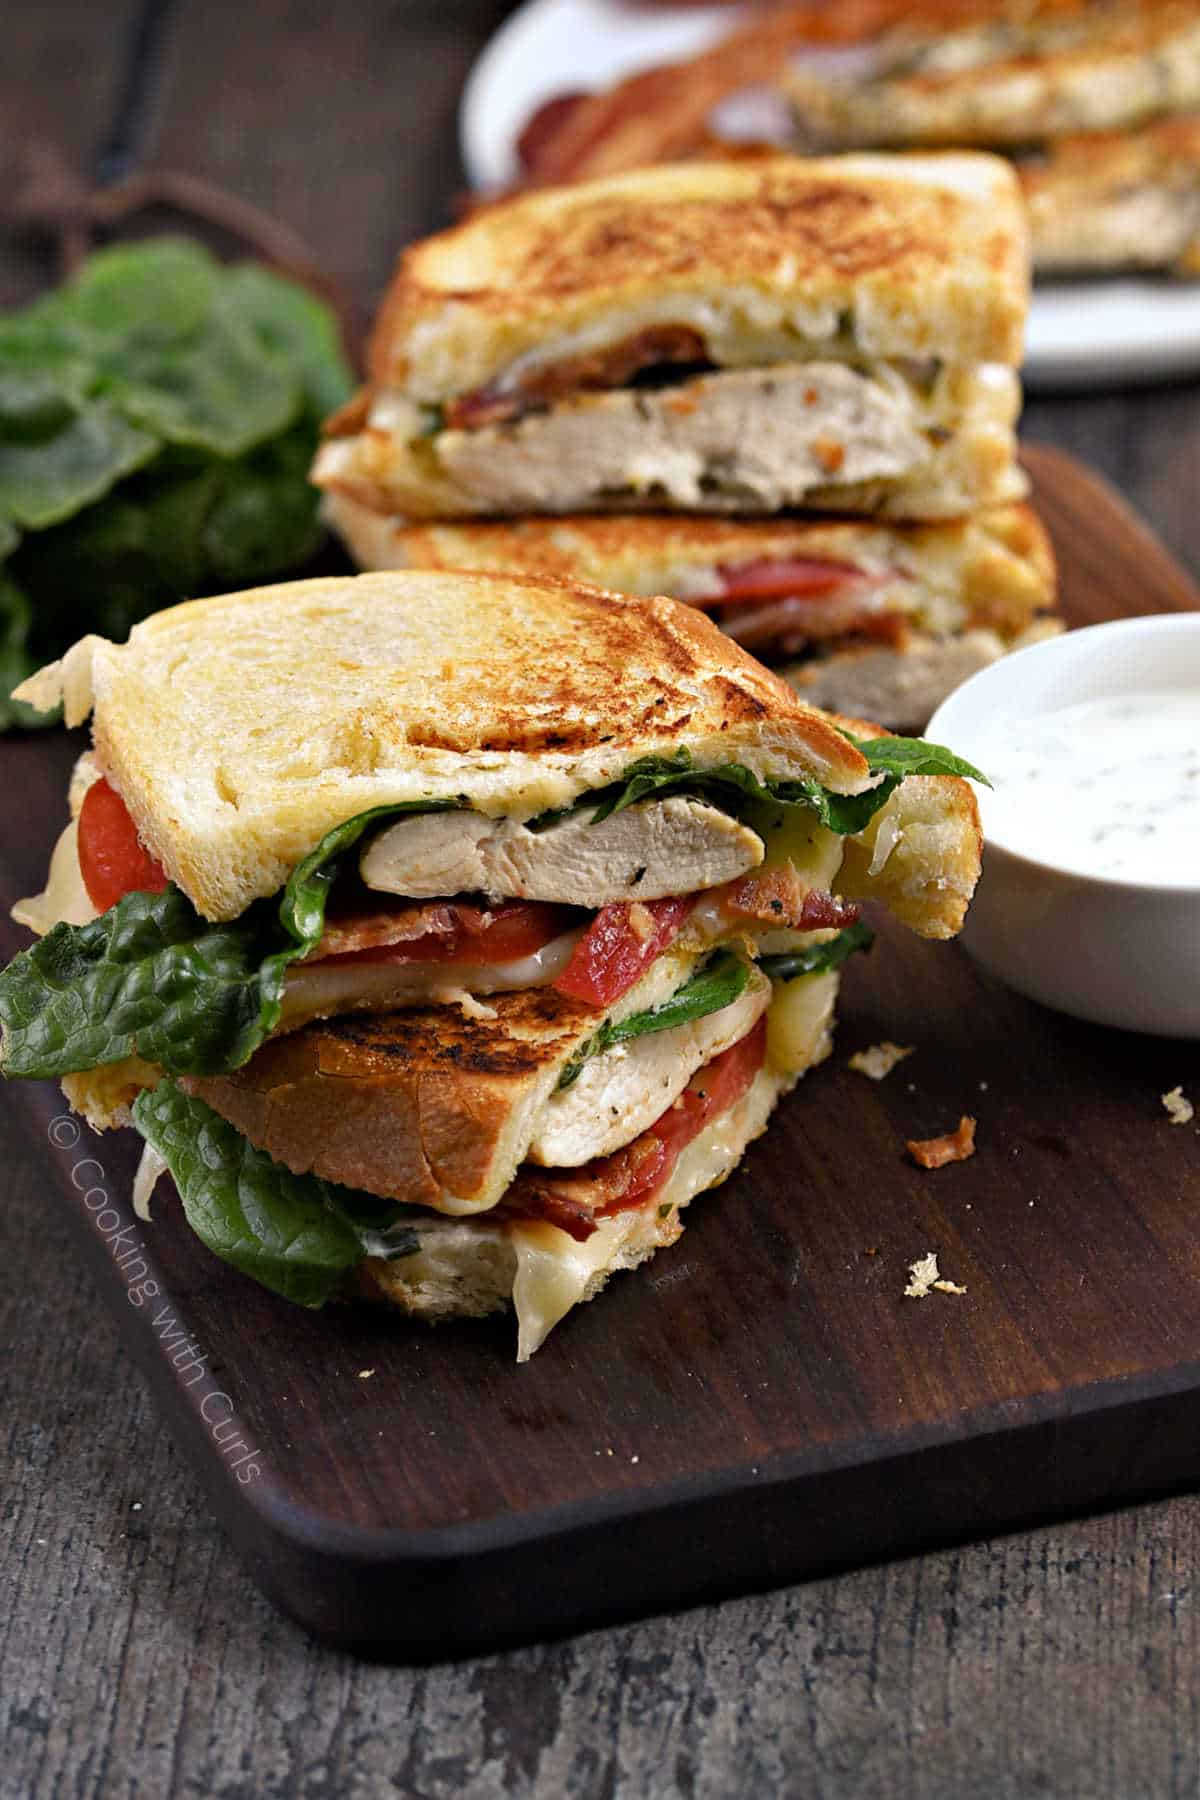 Juicy chicken breasts topped with ranch dressing, crispy bacon, tomato slices, and ranch dressing with grilled sourdough bread, cut in half and stack on a wood board with a second sandwich in the background.